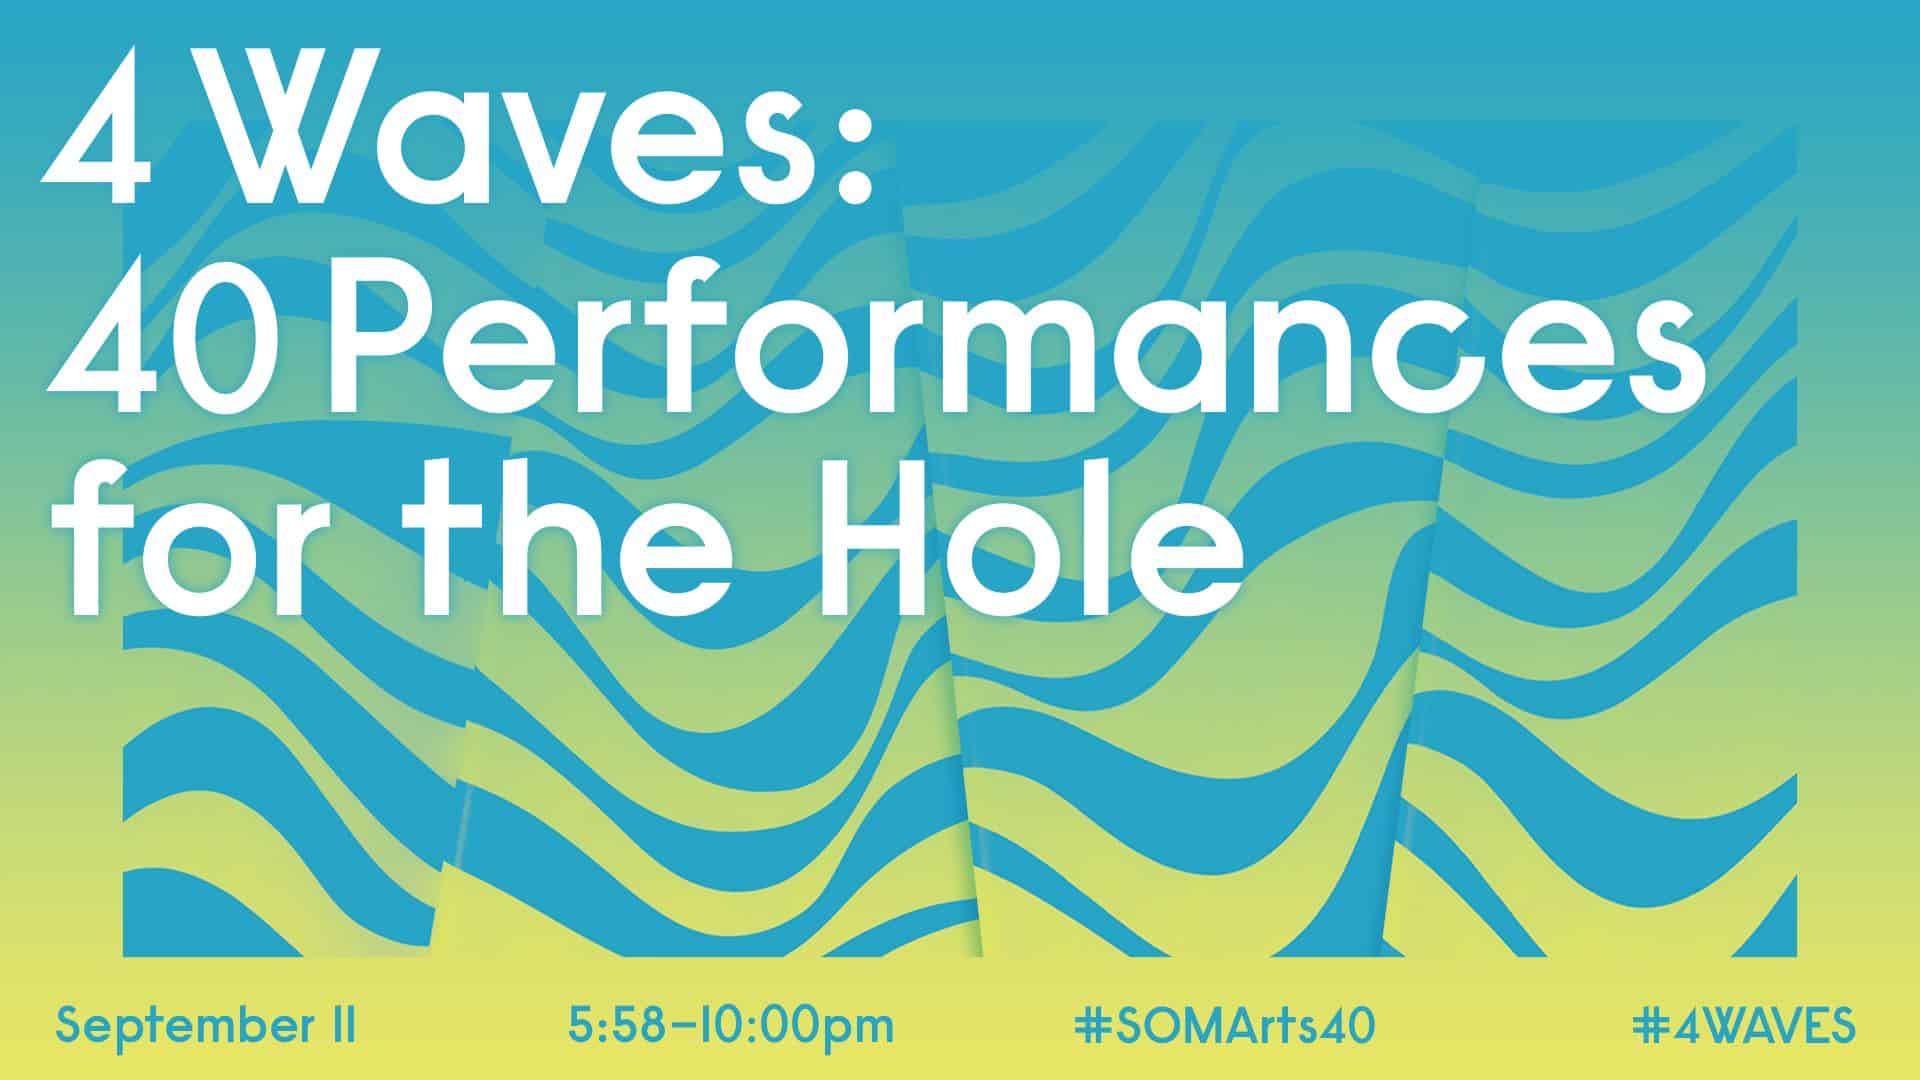 4Waves: 40 Performances for the Hole